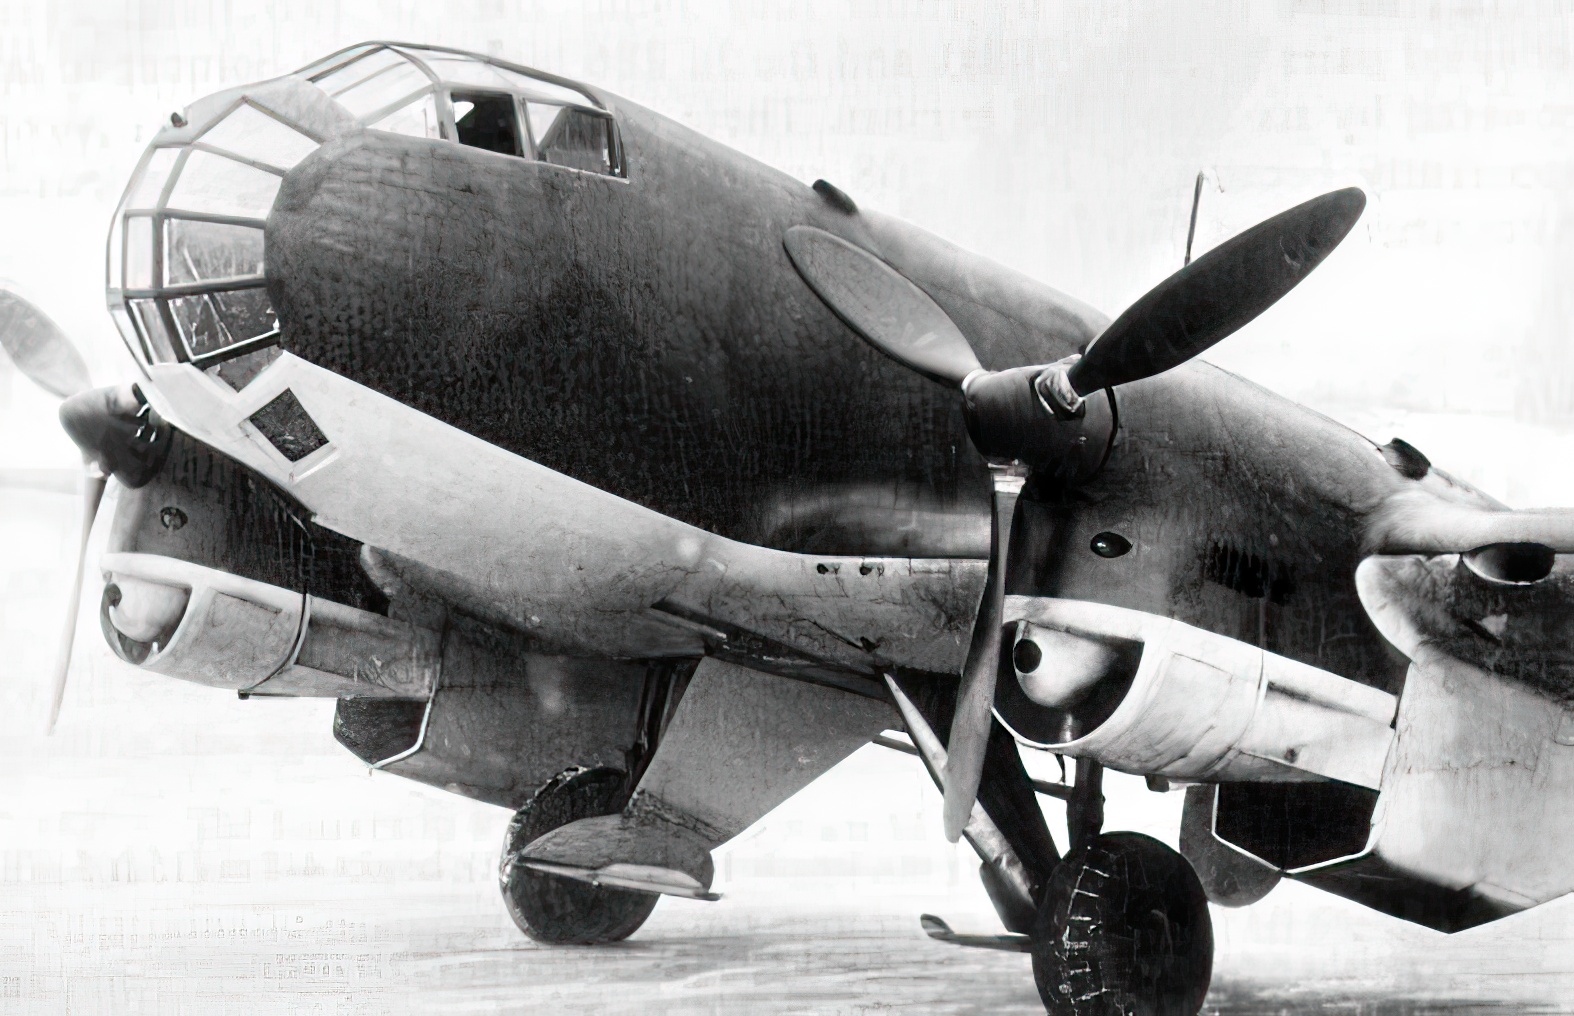 A Ju 86P high-altitude reconnaissance aircraft, with Jumo 207 turbocharged diesel power plants